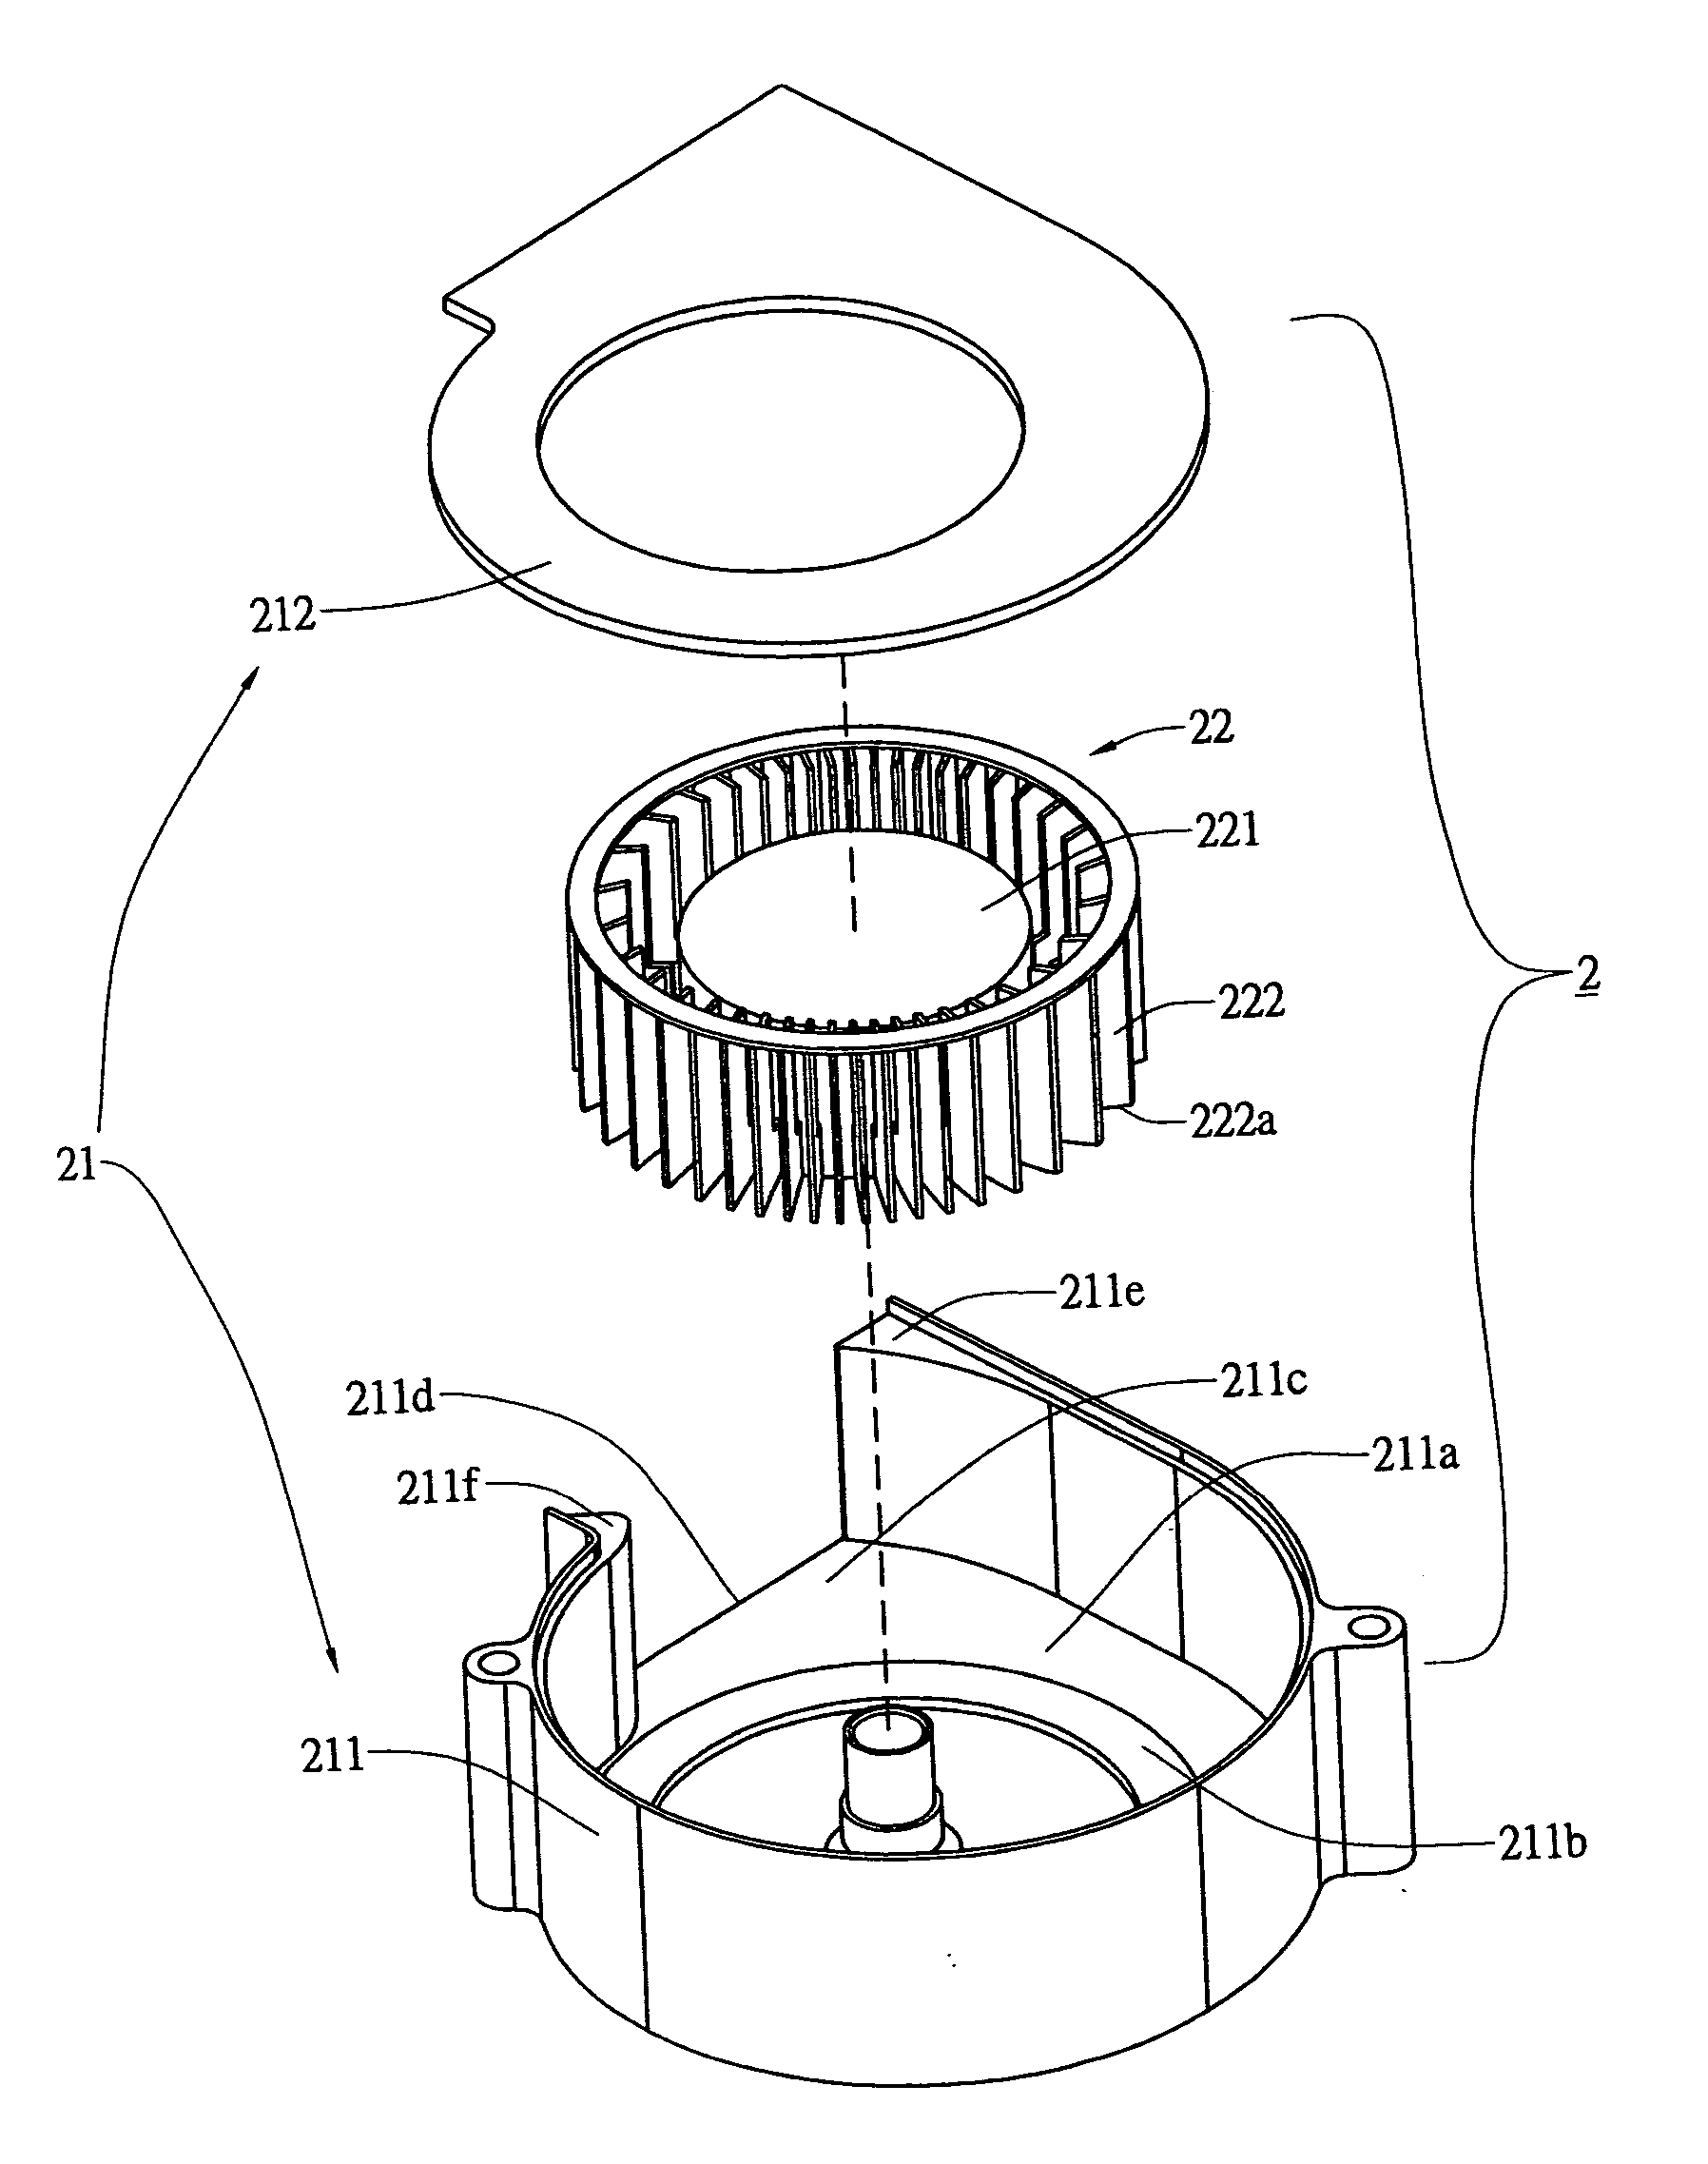 Blower capable of reducing secondary flow